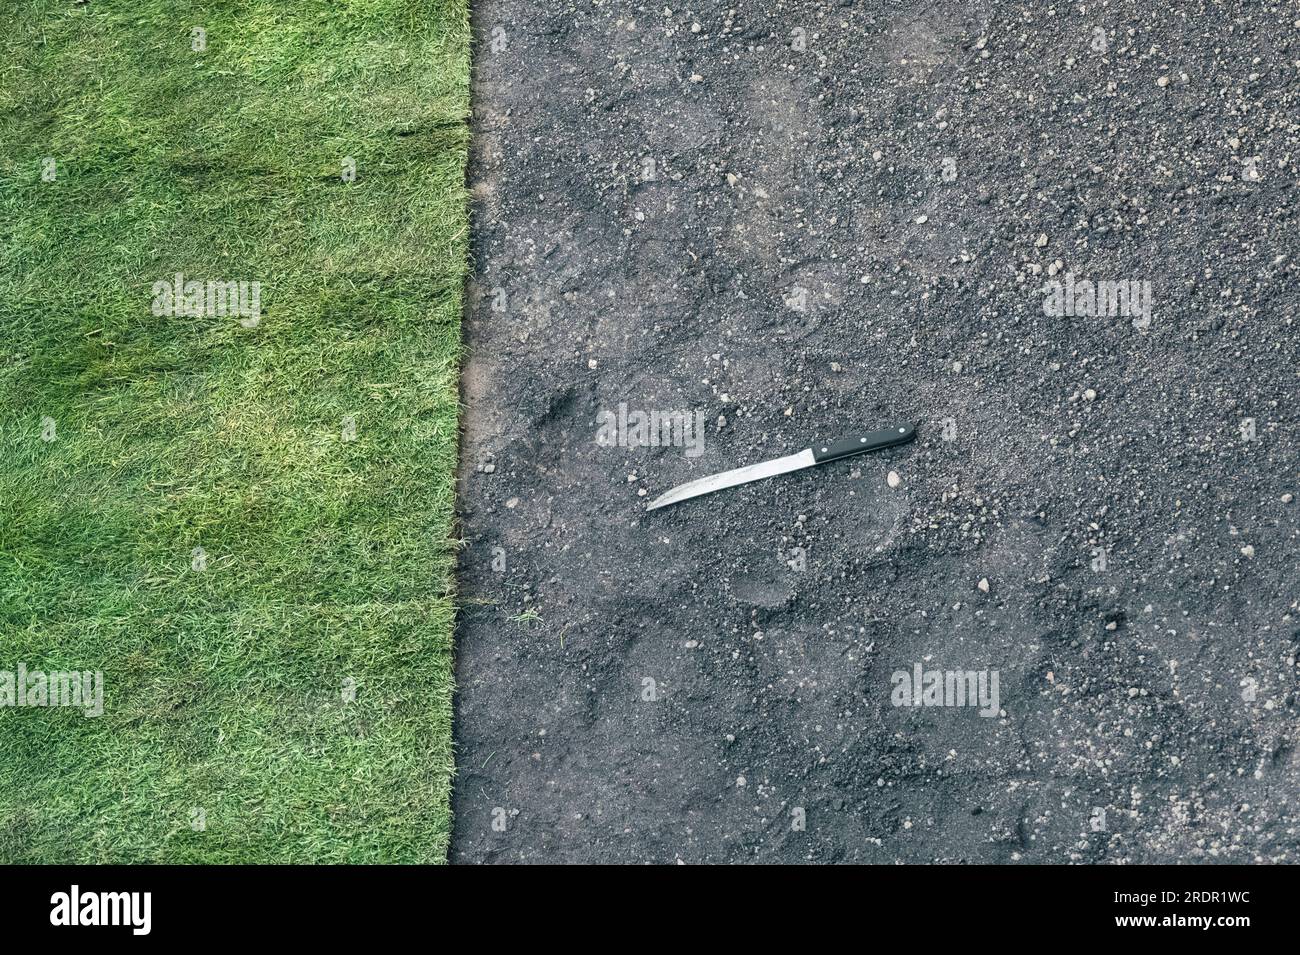 A long bladed knife lies on the ground by some newly laid turf in a small garden in the UK Stock Photo